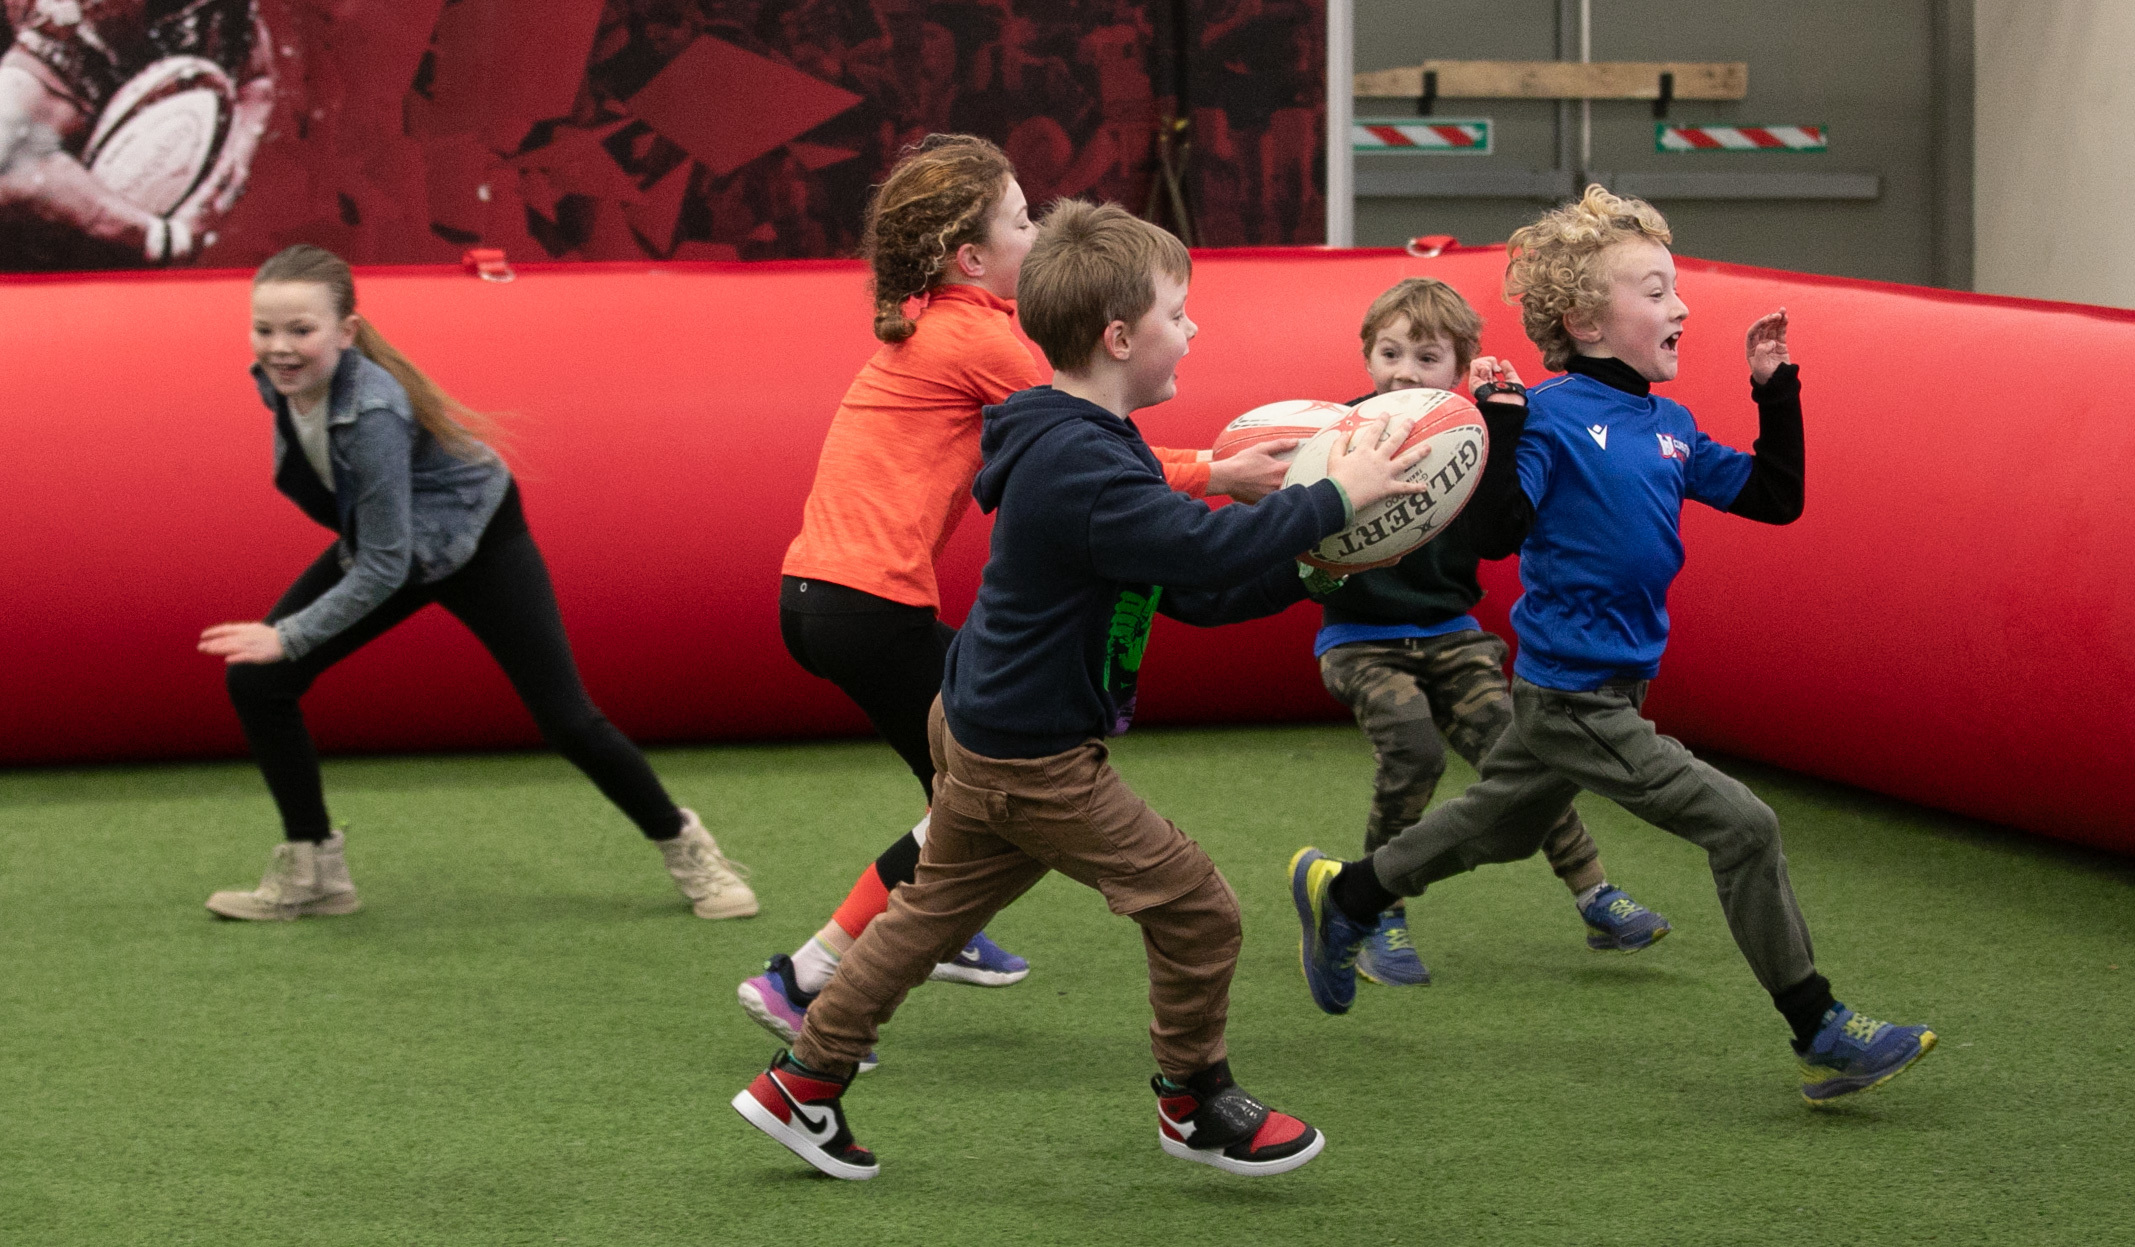 Cartrefi Conwy Sport for Kids event at Eirias Park before the RGC 1404 v Ebbw Vale rugby match Enjoying a rugby tag game